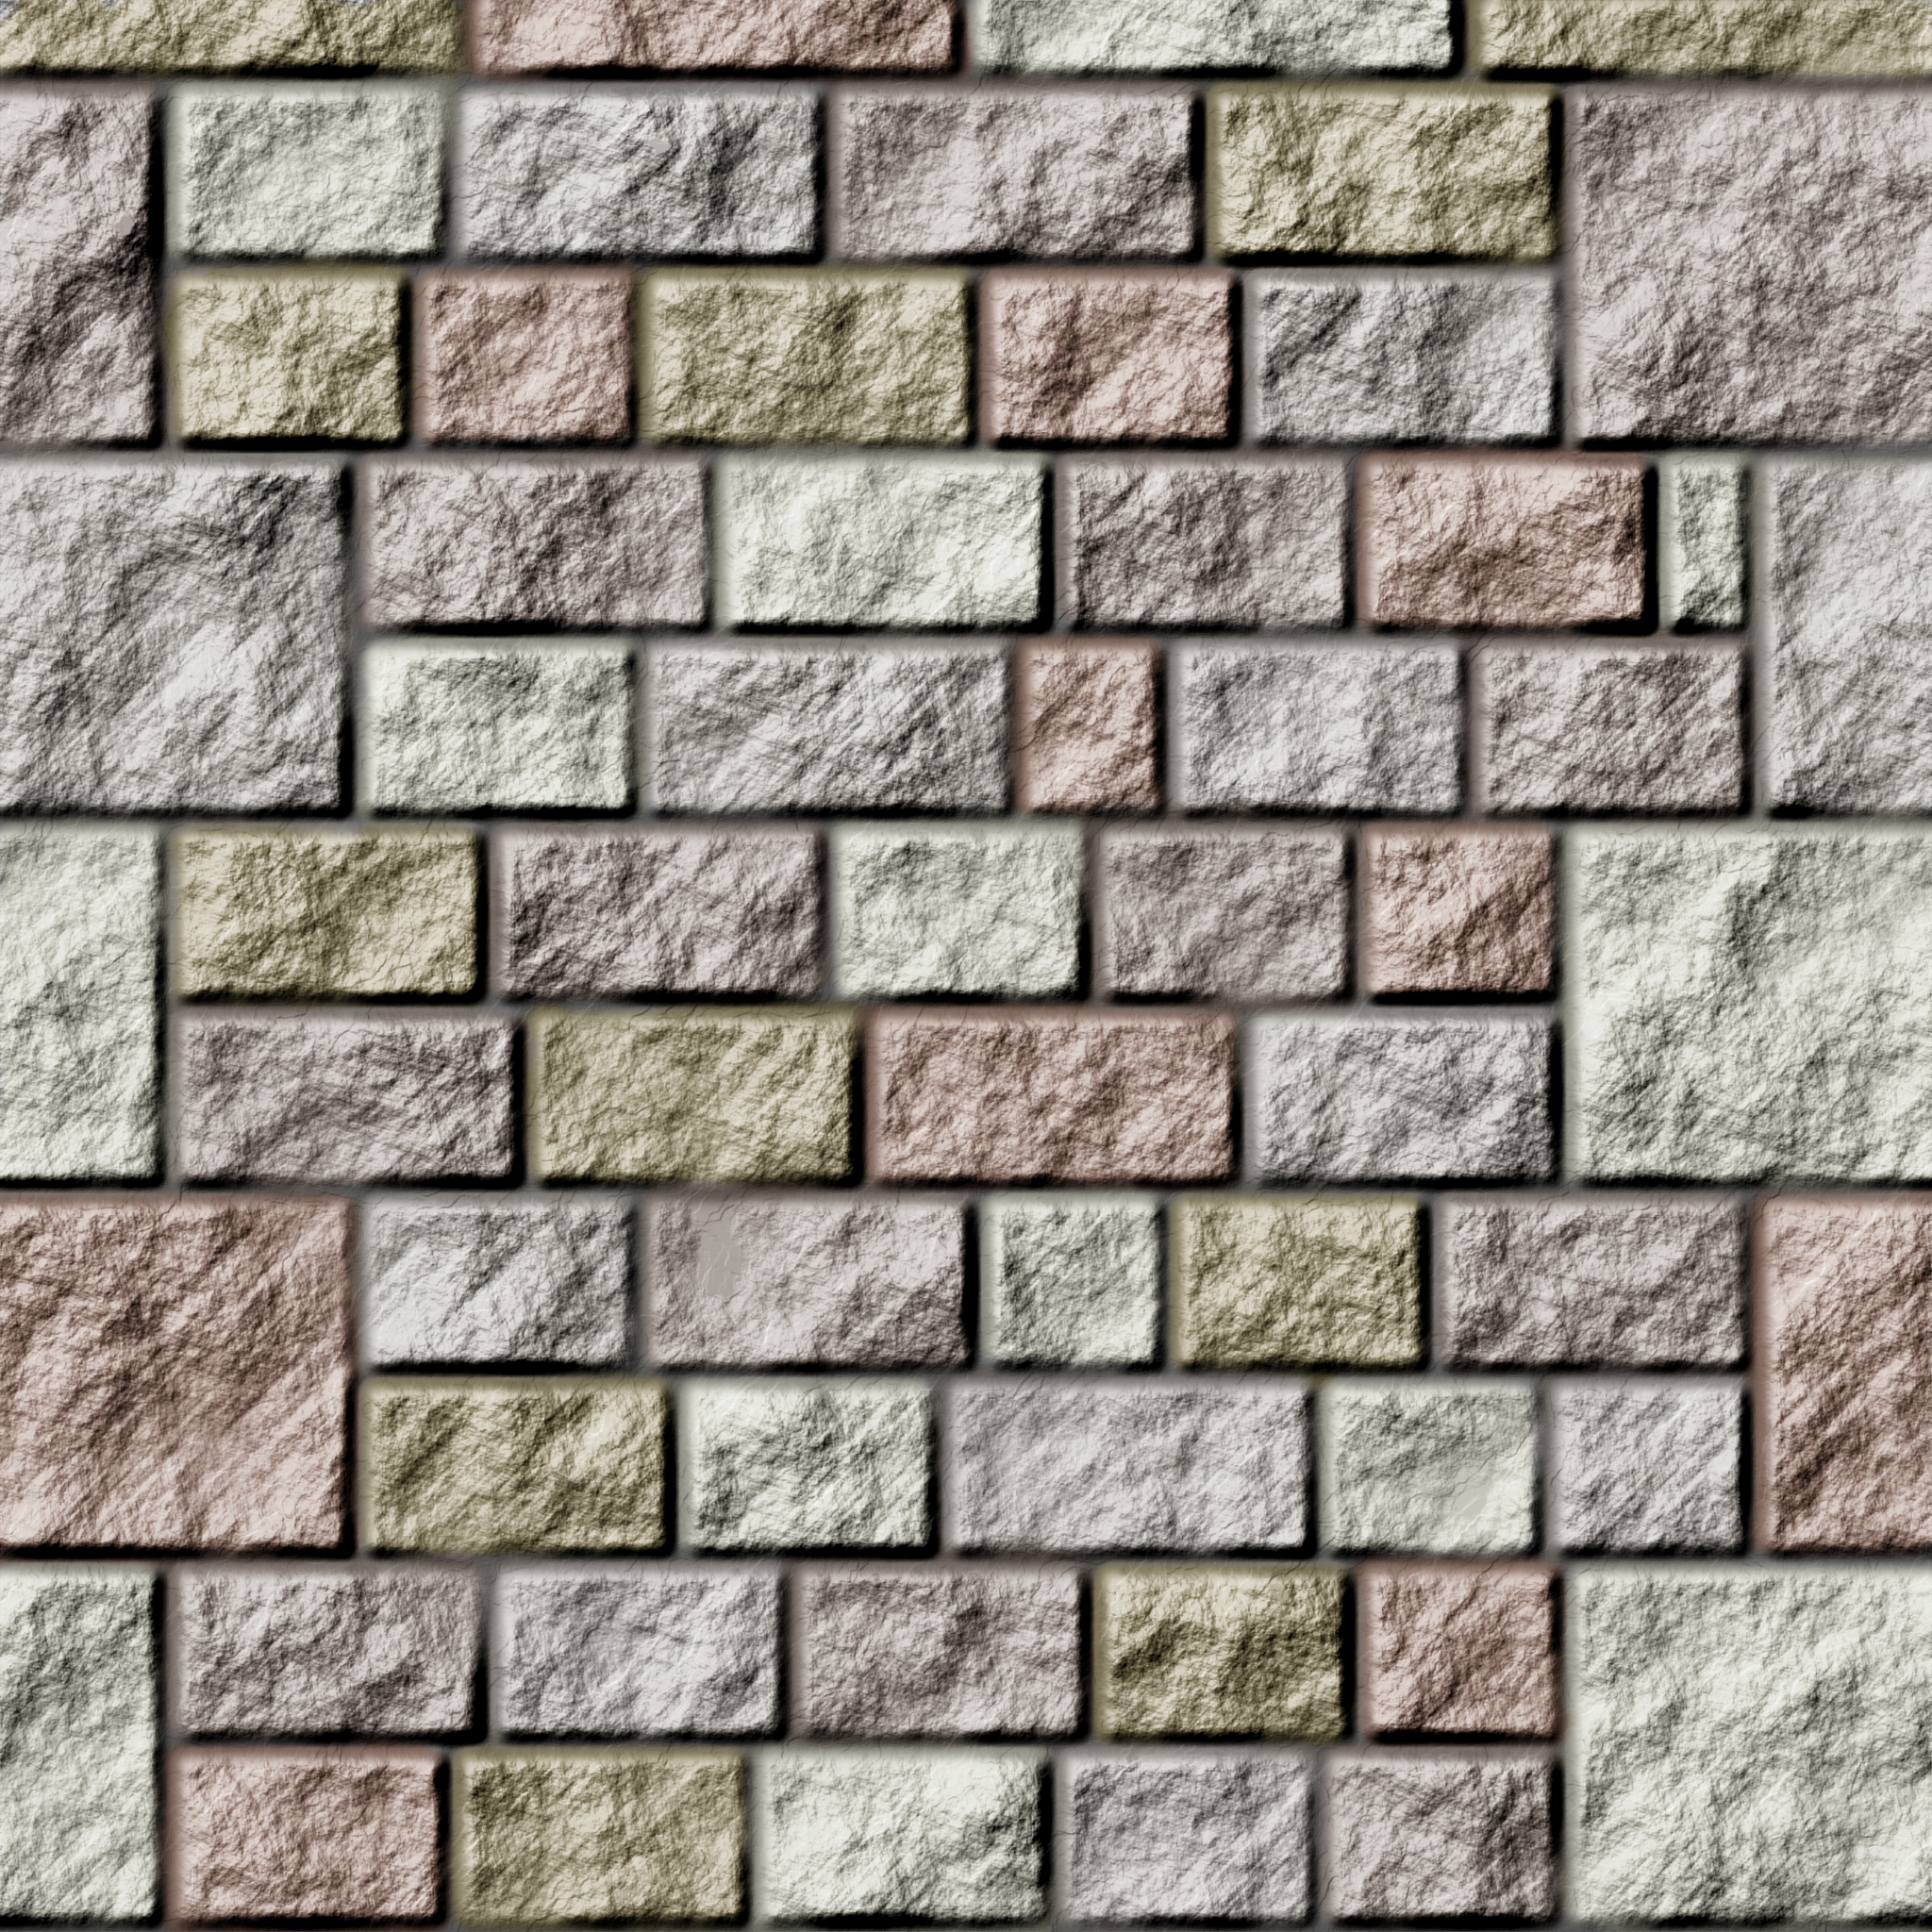 Stone wall 02 | OpenGameArt.org